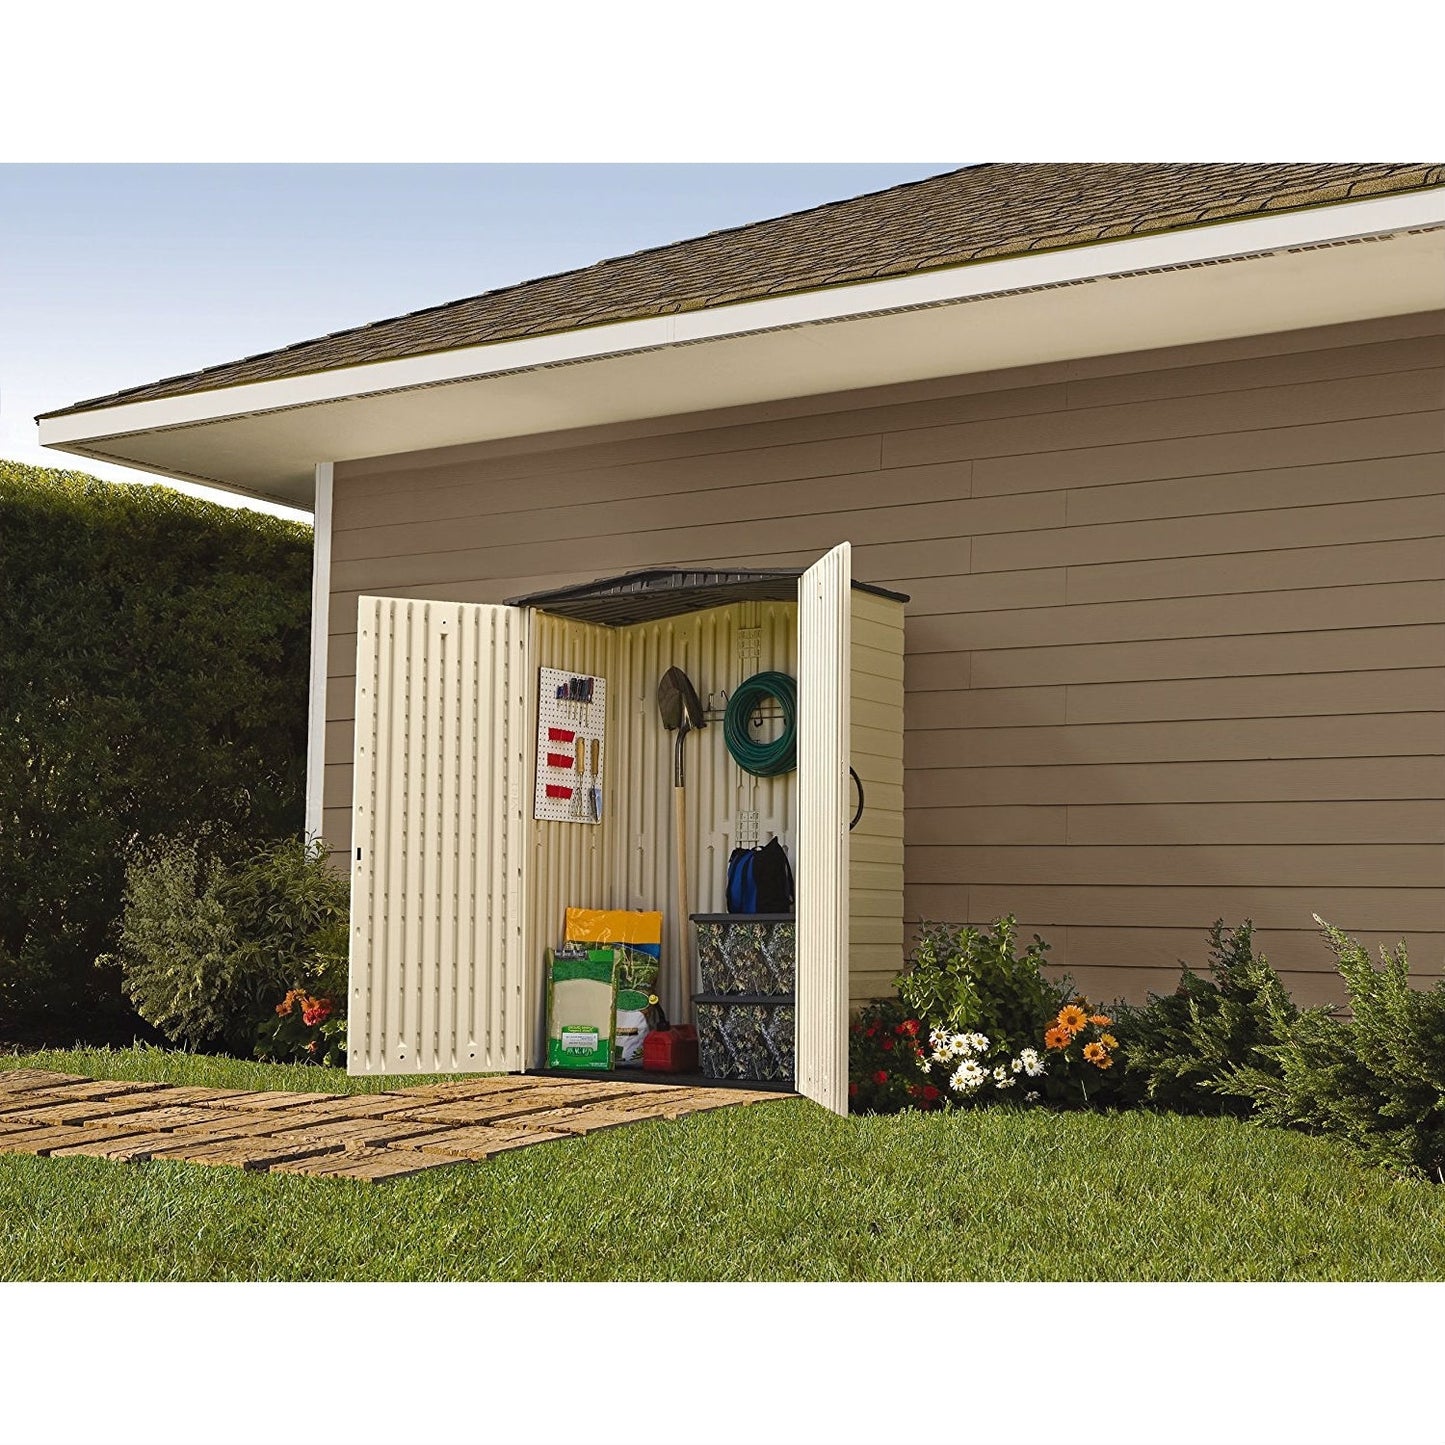 Outdoor 4.5-ft x 2-ft Study Double Walled Storage Shed